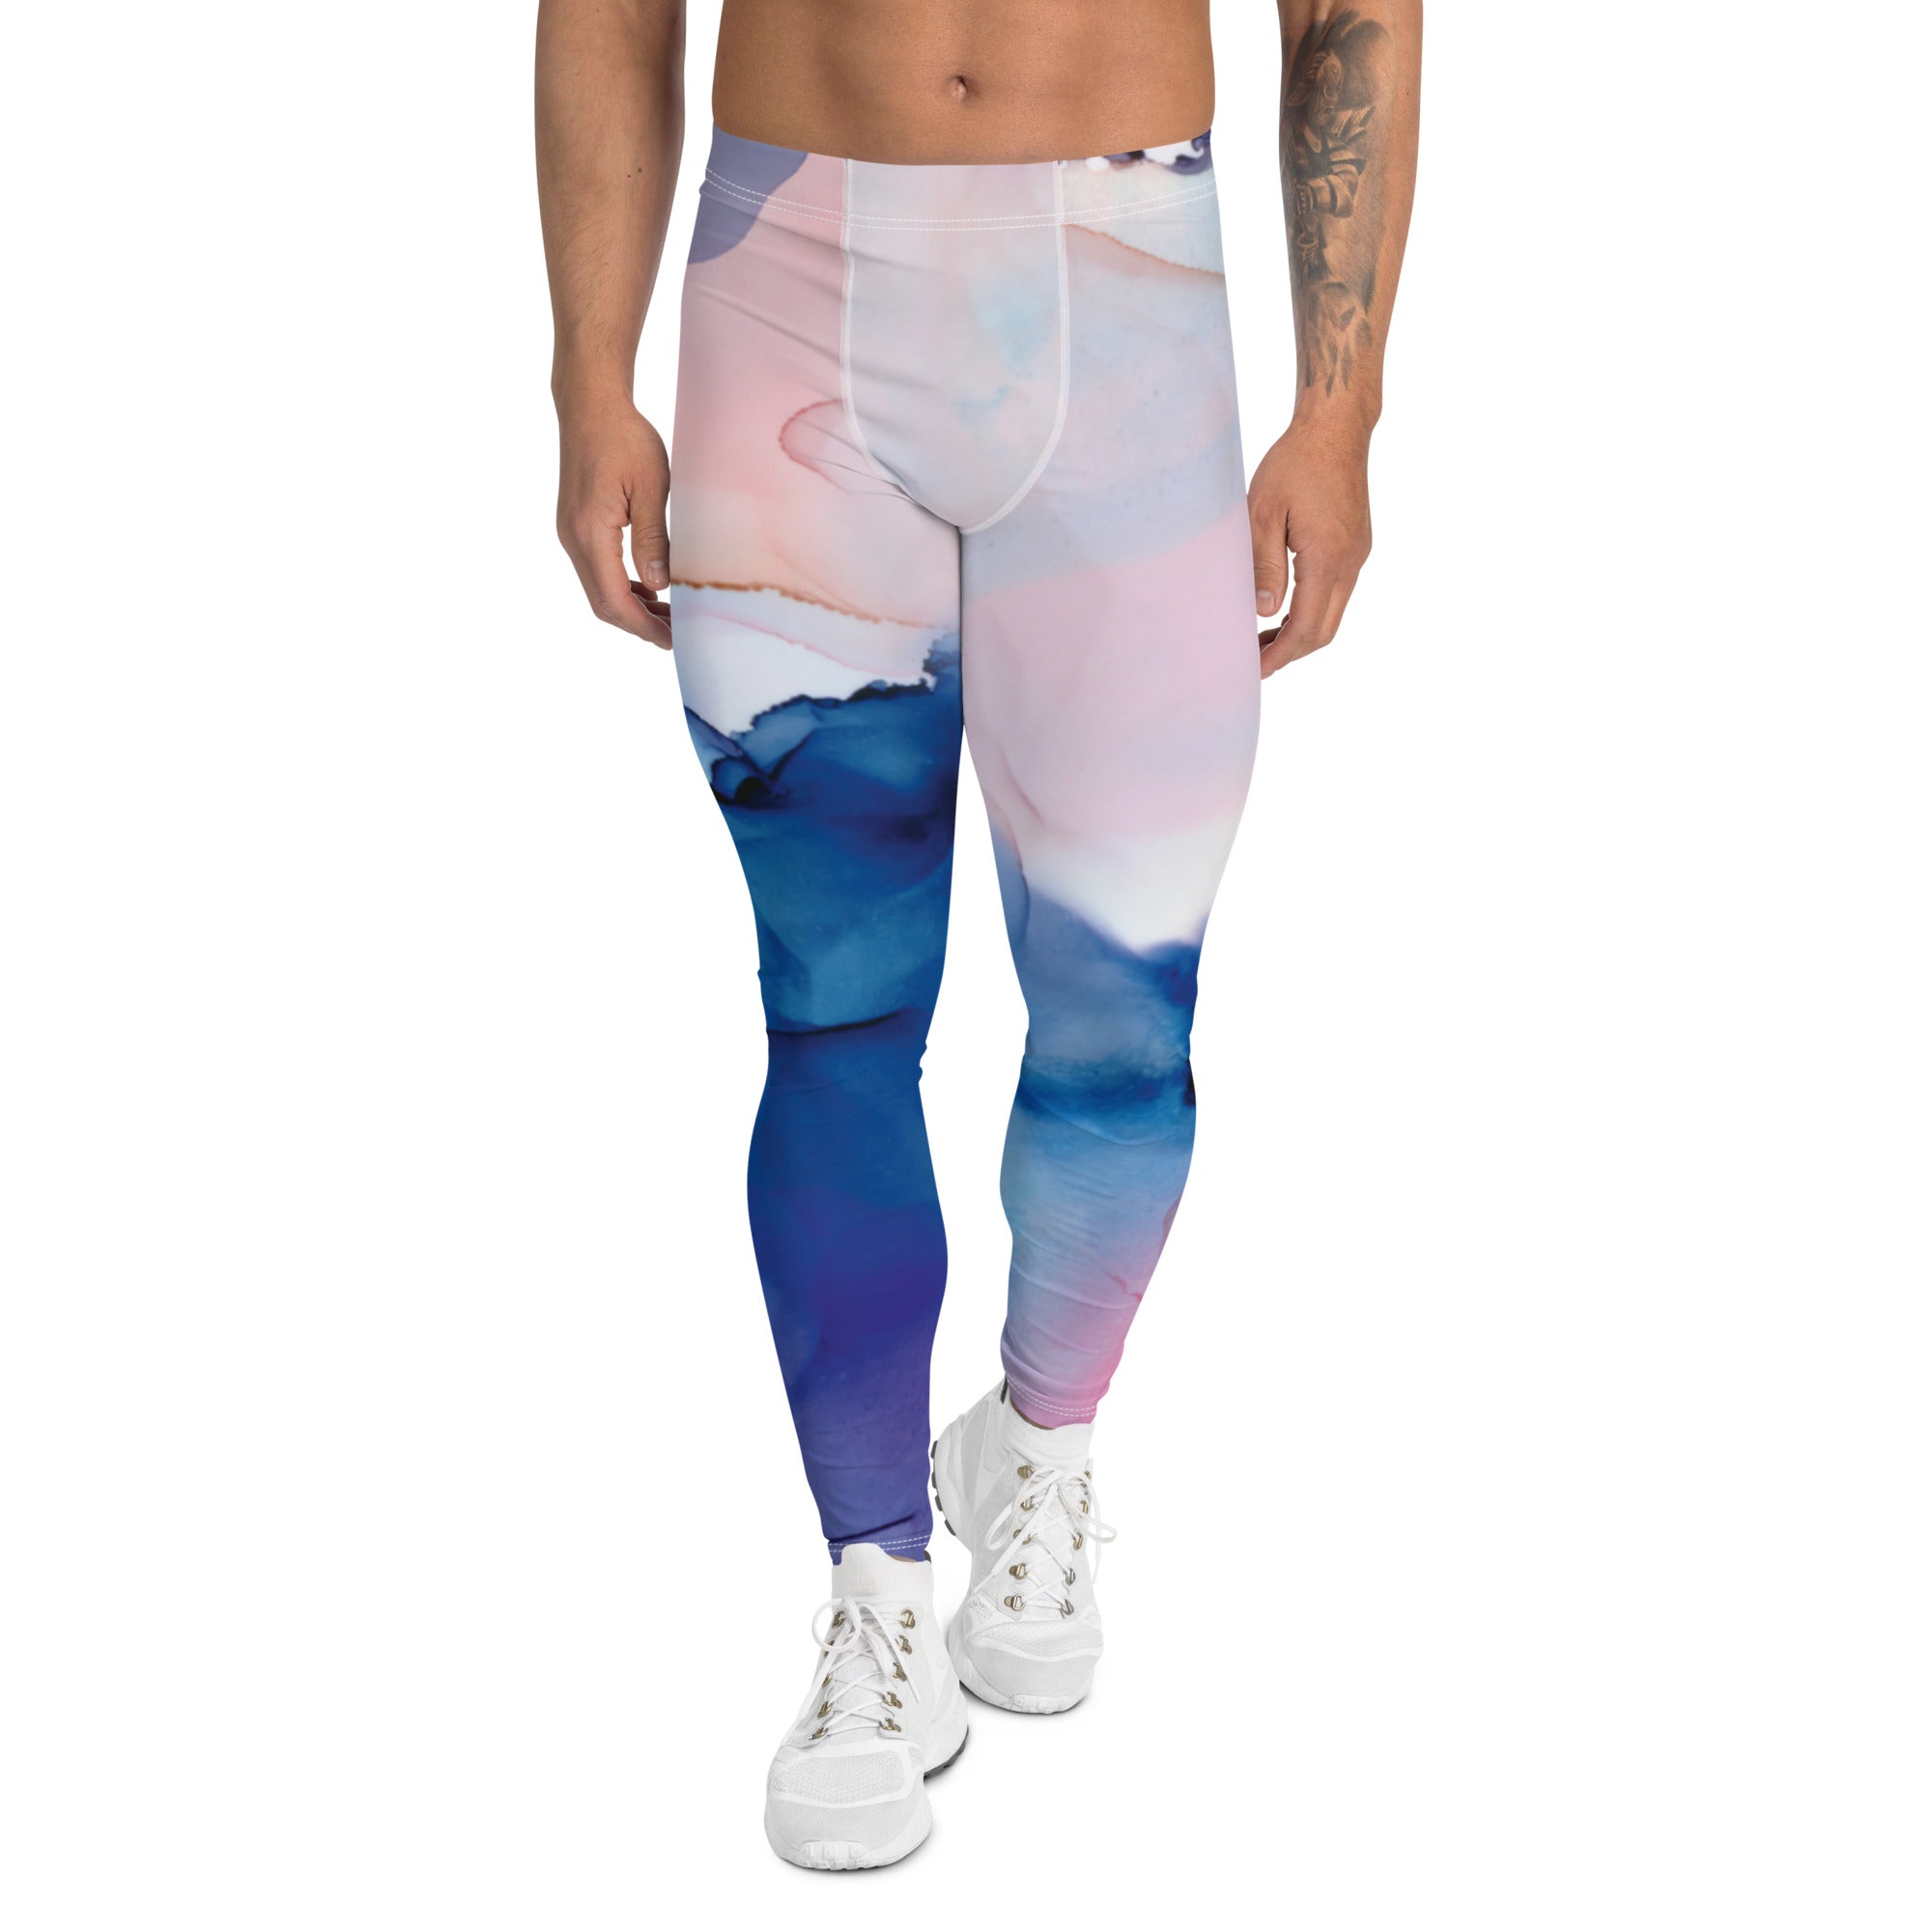 Abstract Blue Men's Leggings, Blue Pink Purple Abstract Designer Print Sexy Meggings Men's Workout Gym Tights Leggings, Men's Compression Tights Pants - Made in USA/ EU/ MX (US Size: XS-3XL) 